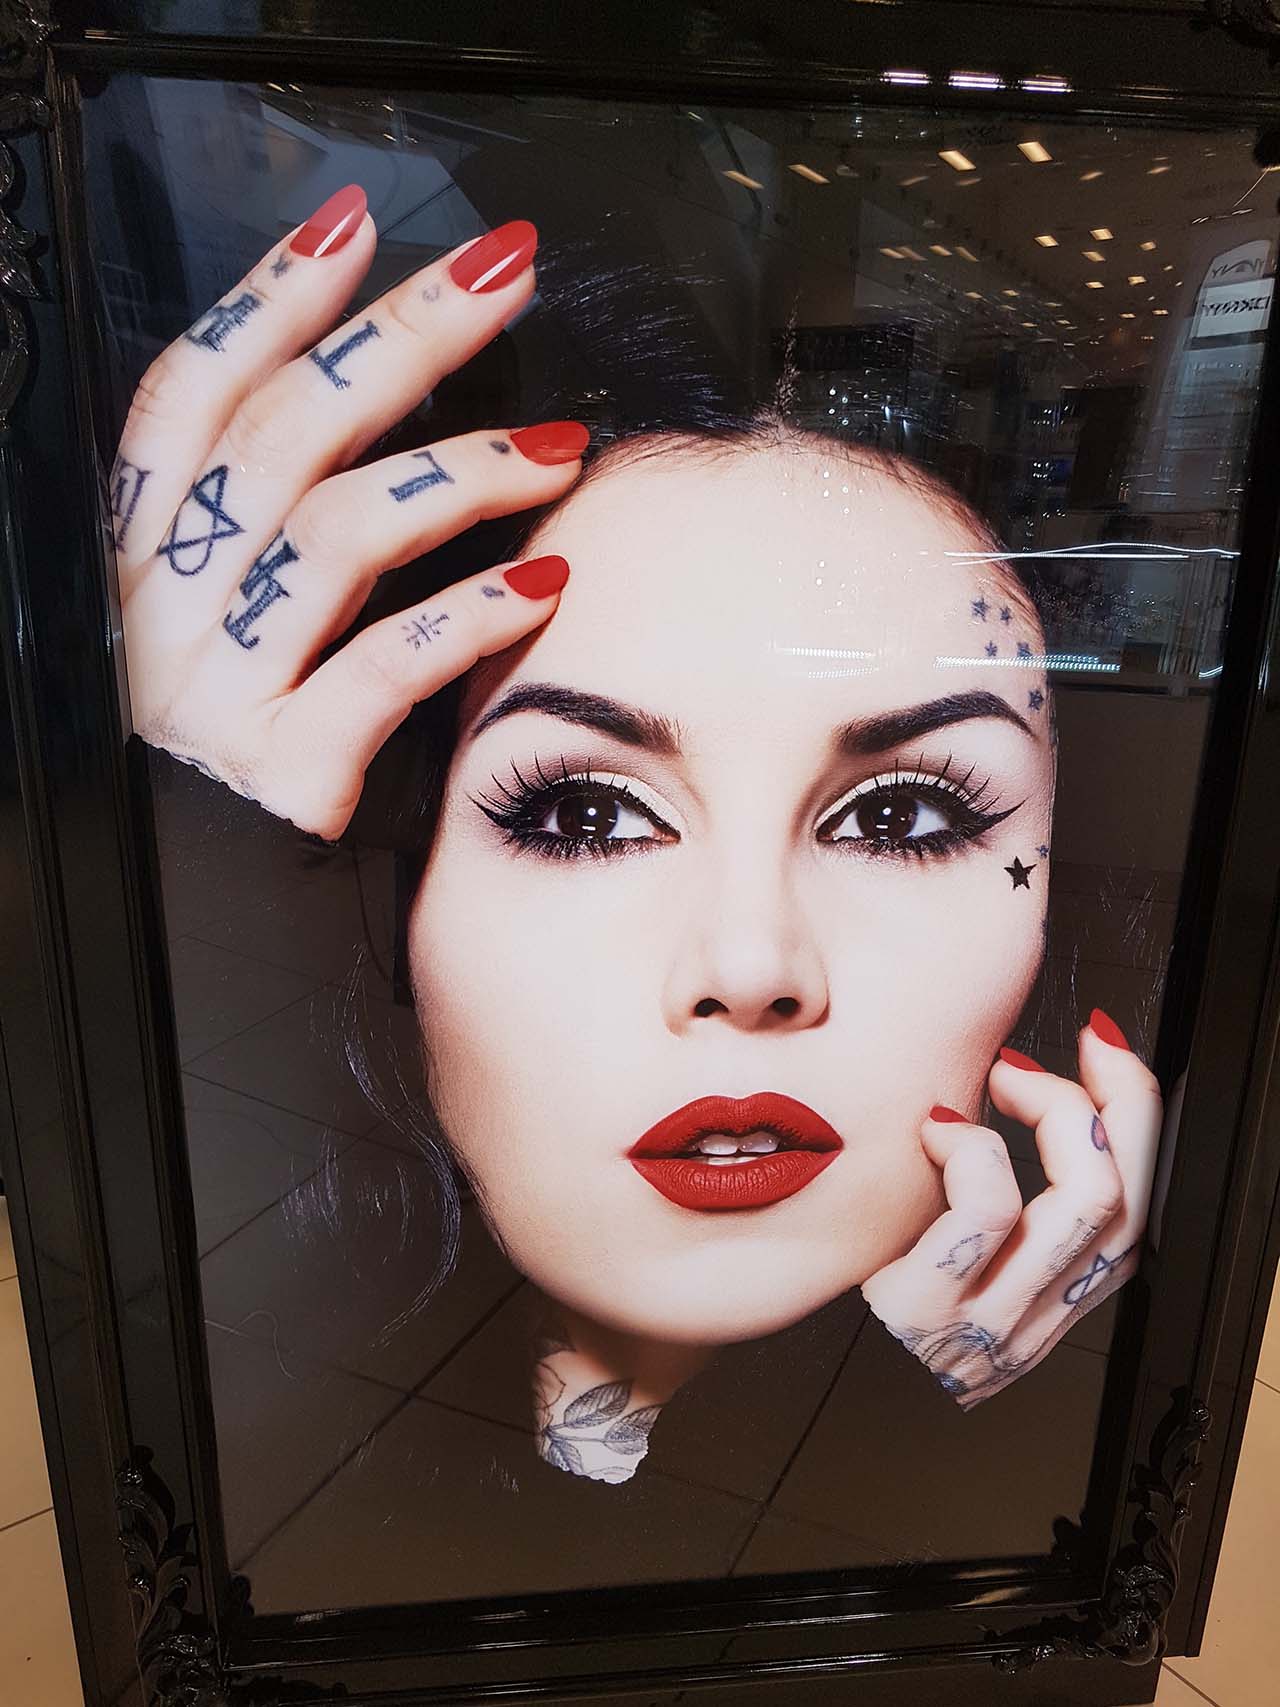 My Autumn Beauty Day: Catching Up With Favourite Brands [Part 1] - Kat Von D area in Debenhams